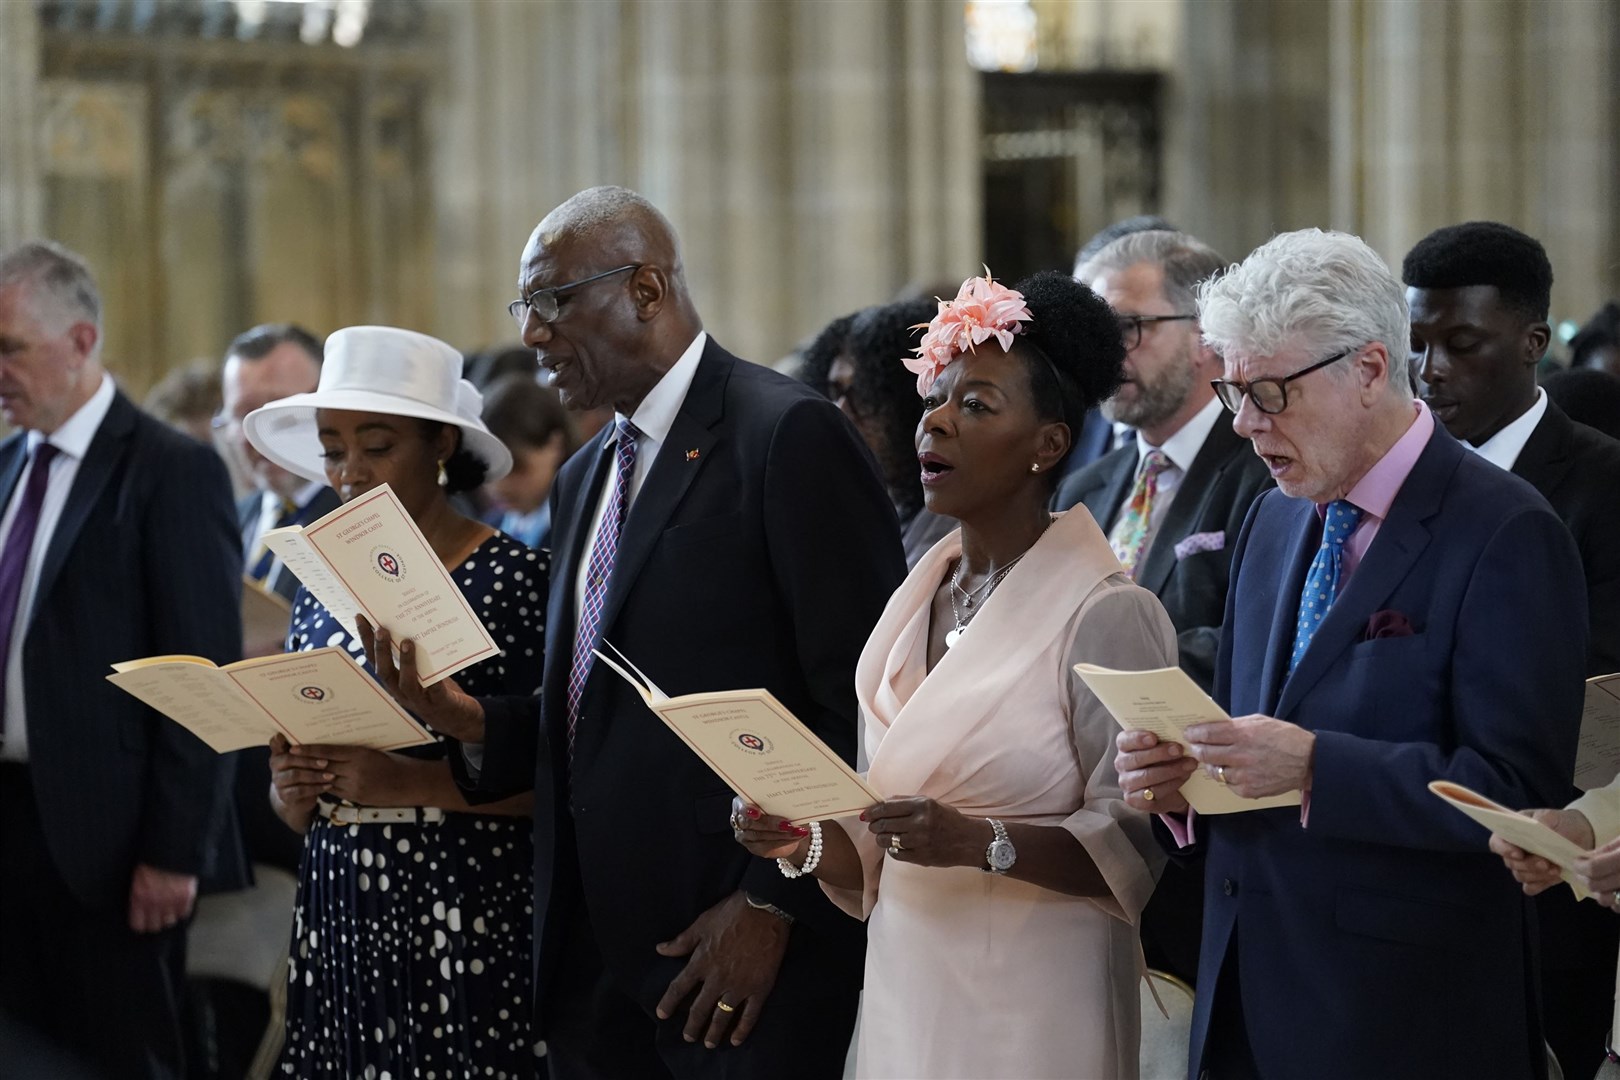 Baroness Dame Floella Benjamin, second right, was among the guests (Andrew Matthews/PA)